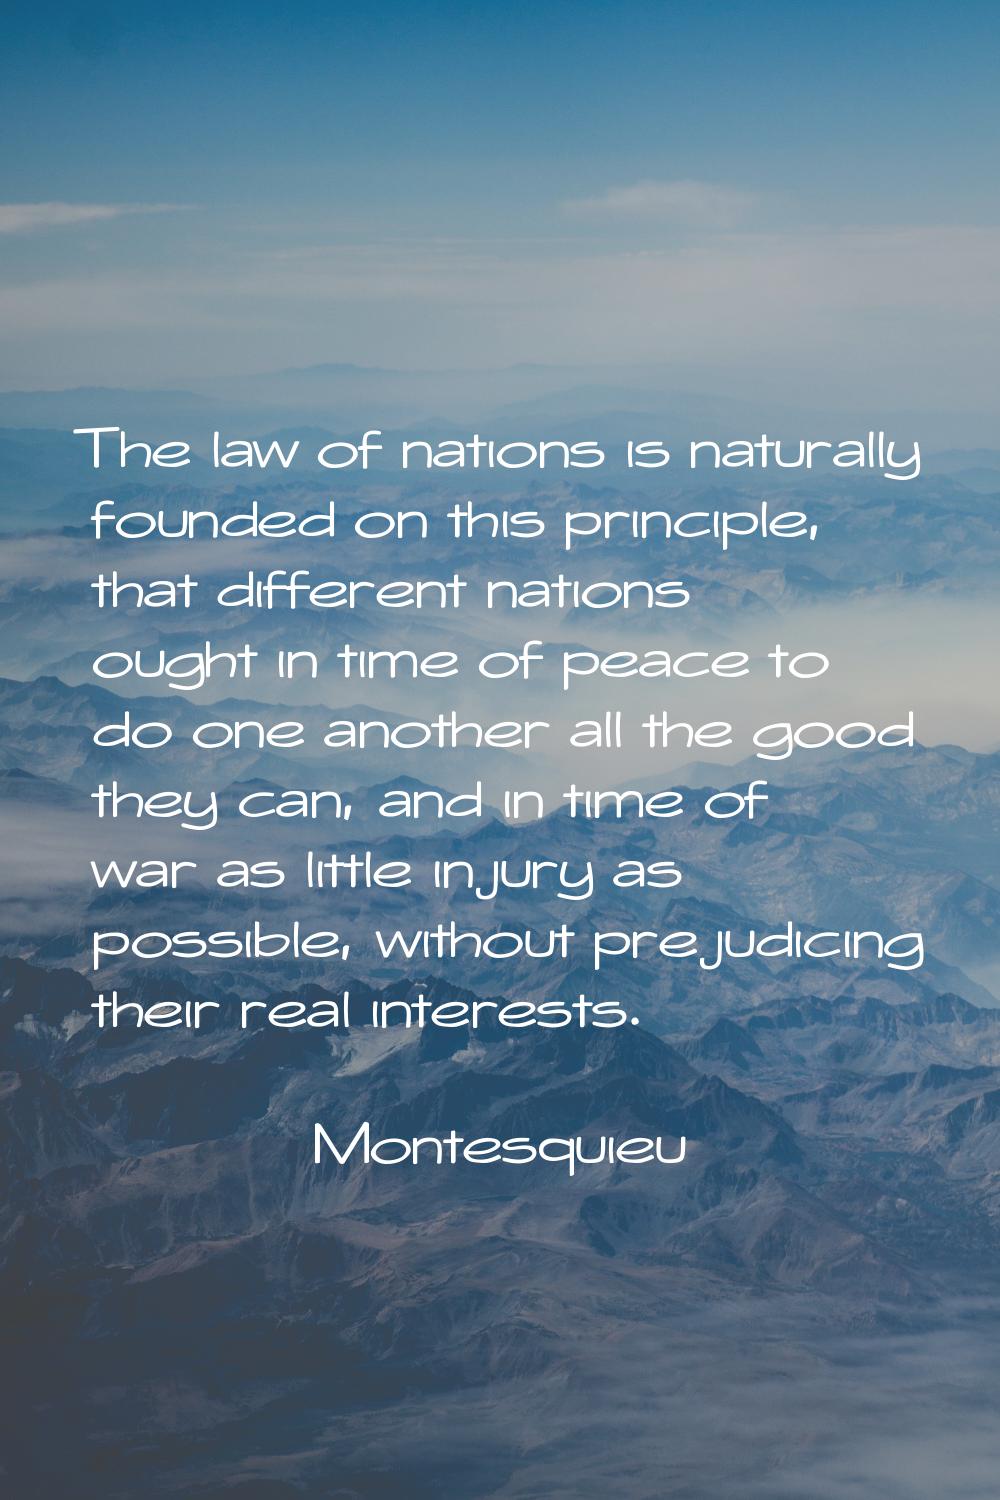 The law of nations is naturally founded on this principle, that different nations ought in time of 